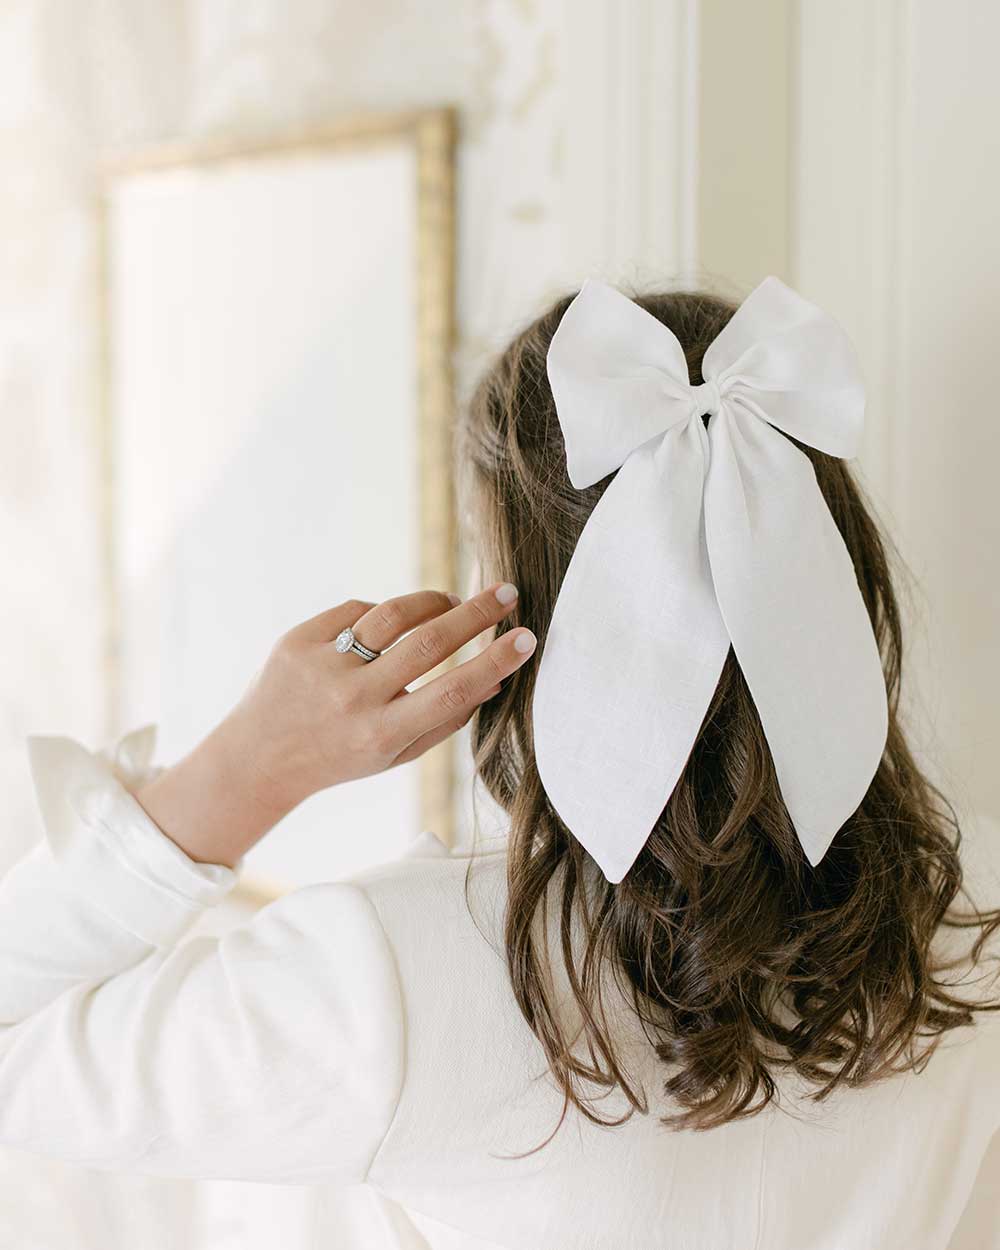 THE WHITE LINEN BOW – Clementine & Mint